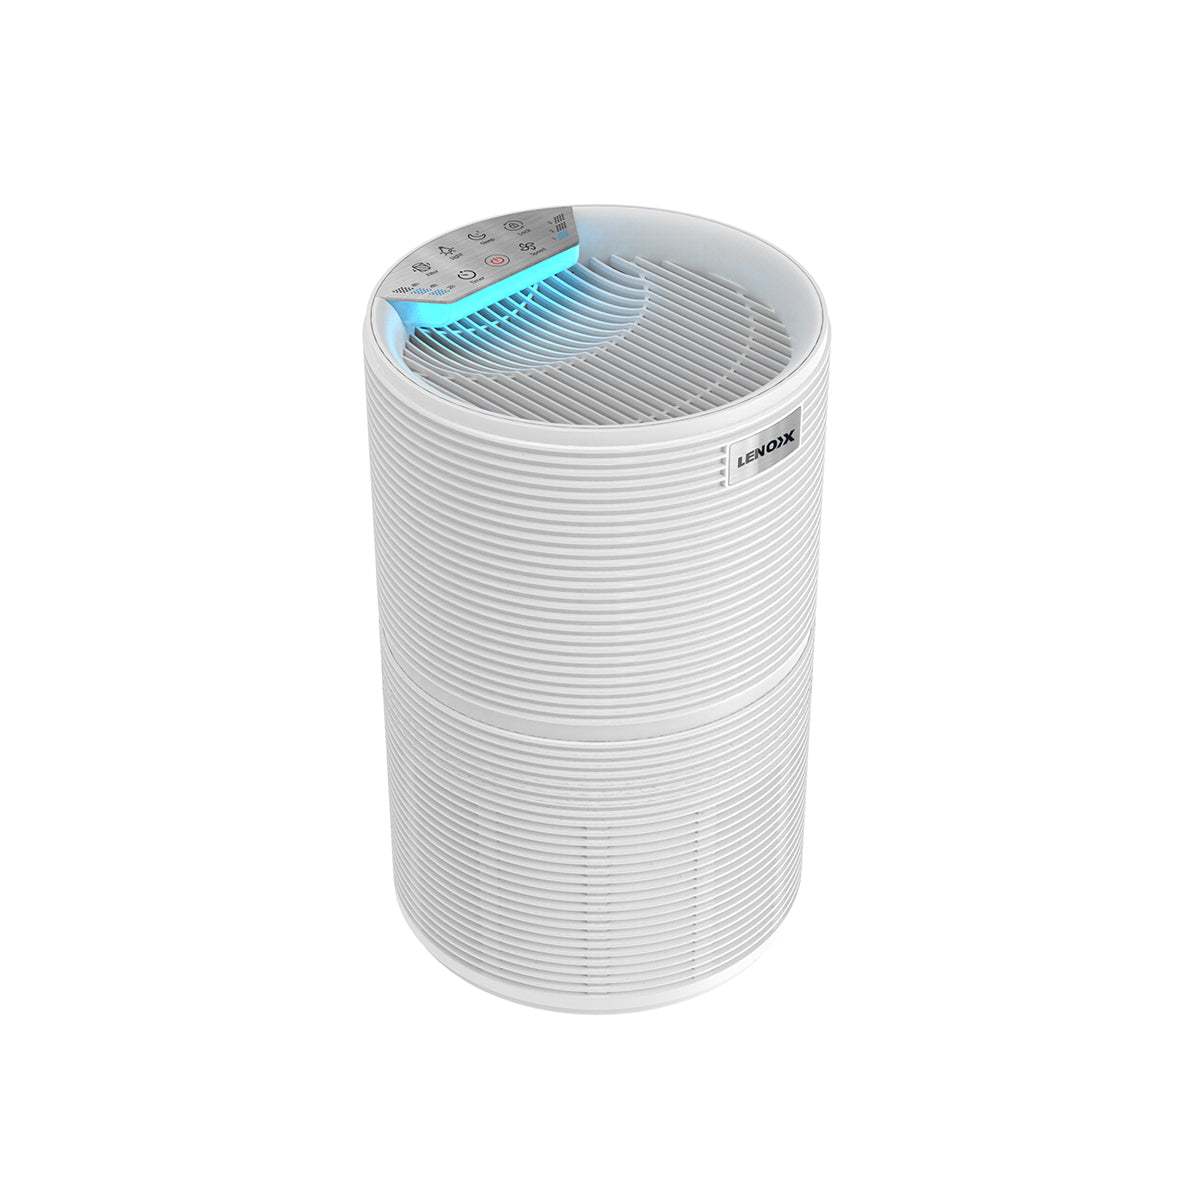 Top view of the AP90 Air Purifier & Cleaner  with its control power and blue-coloured light.